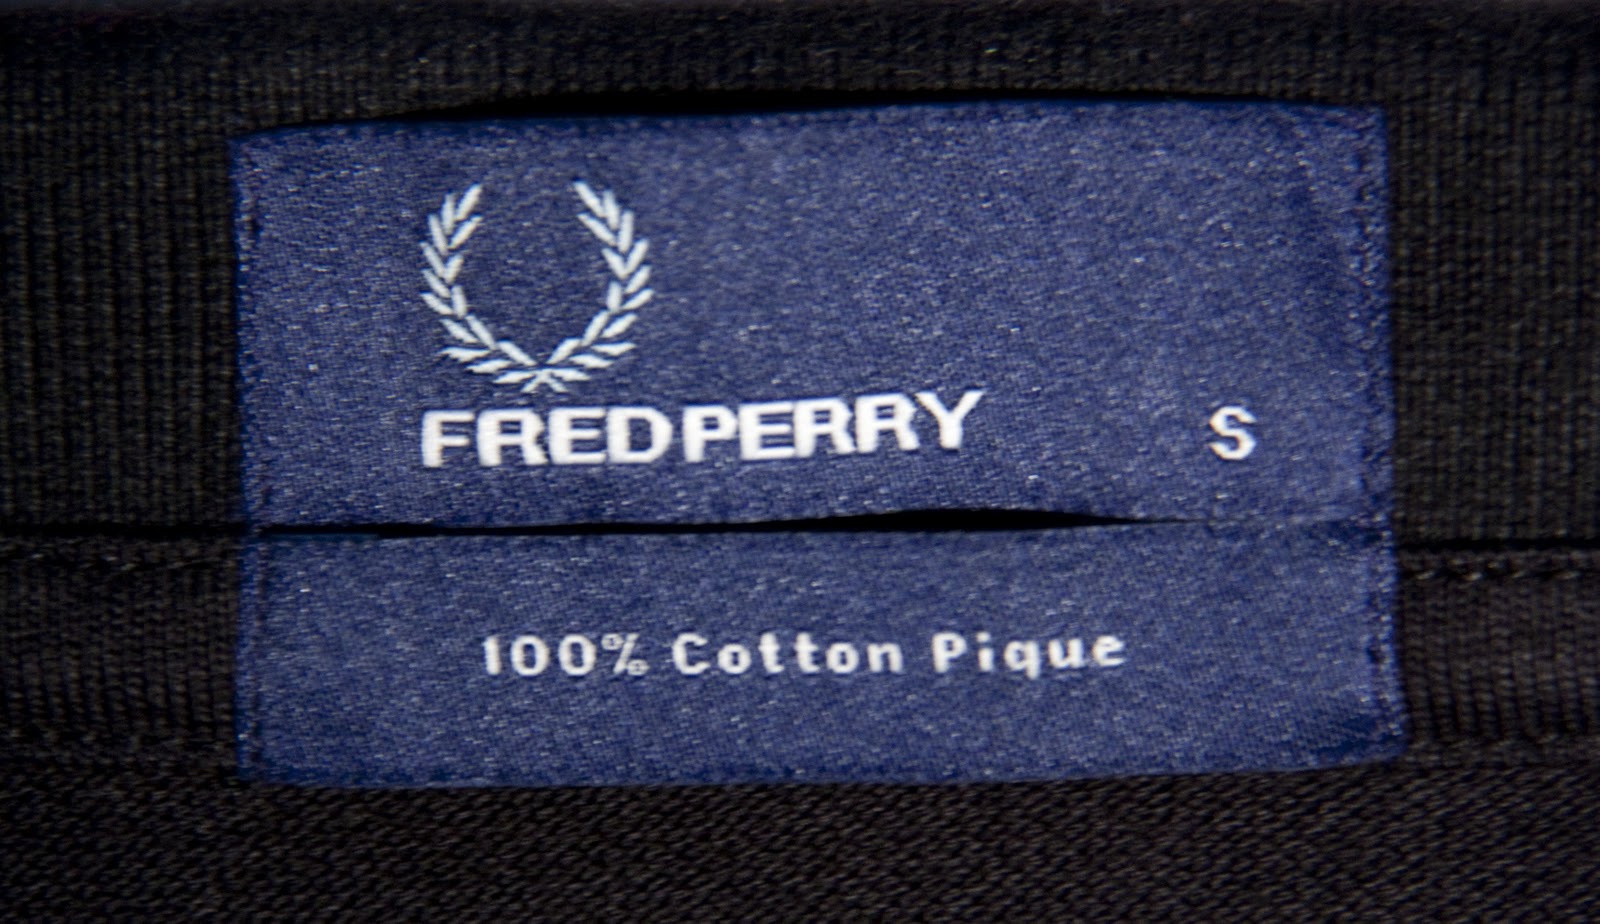 MES MODES: 100 % Authentic Fred Perry Polo Tee